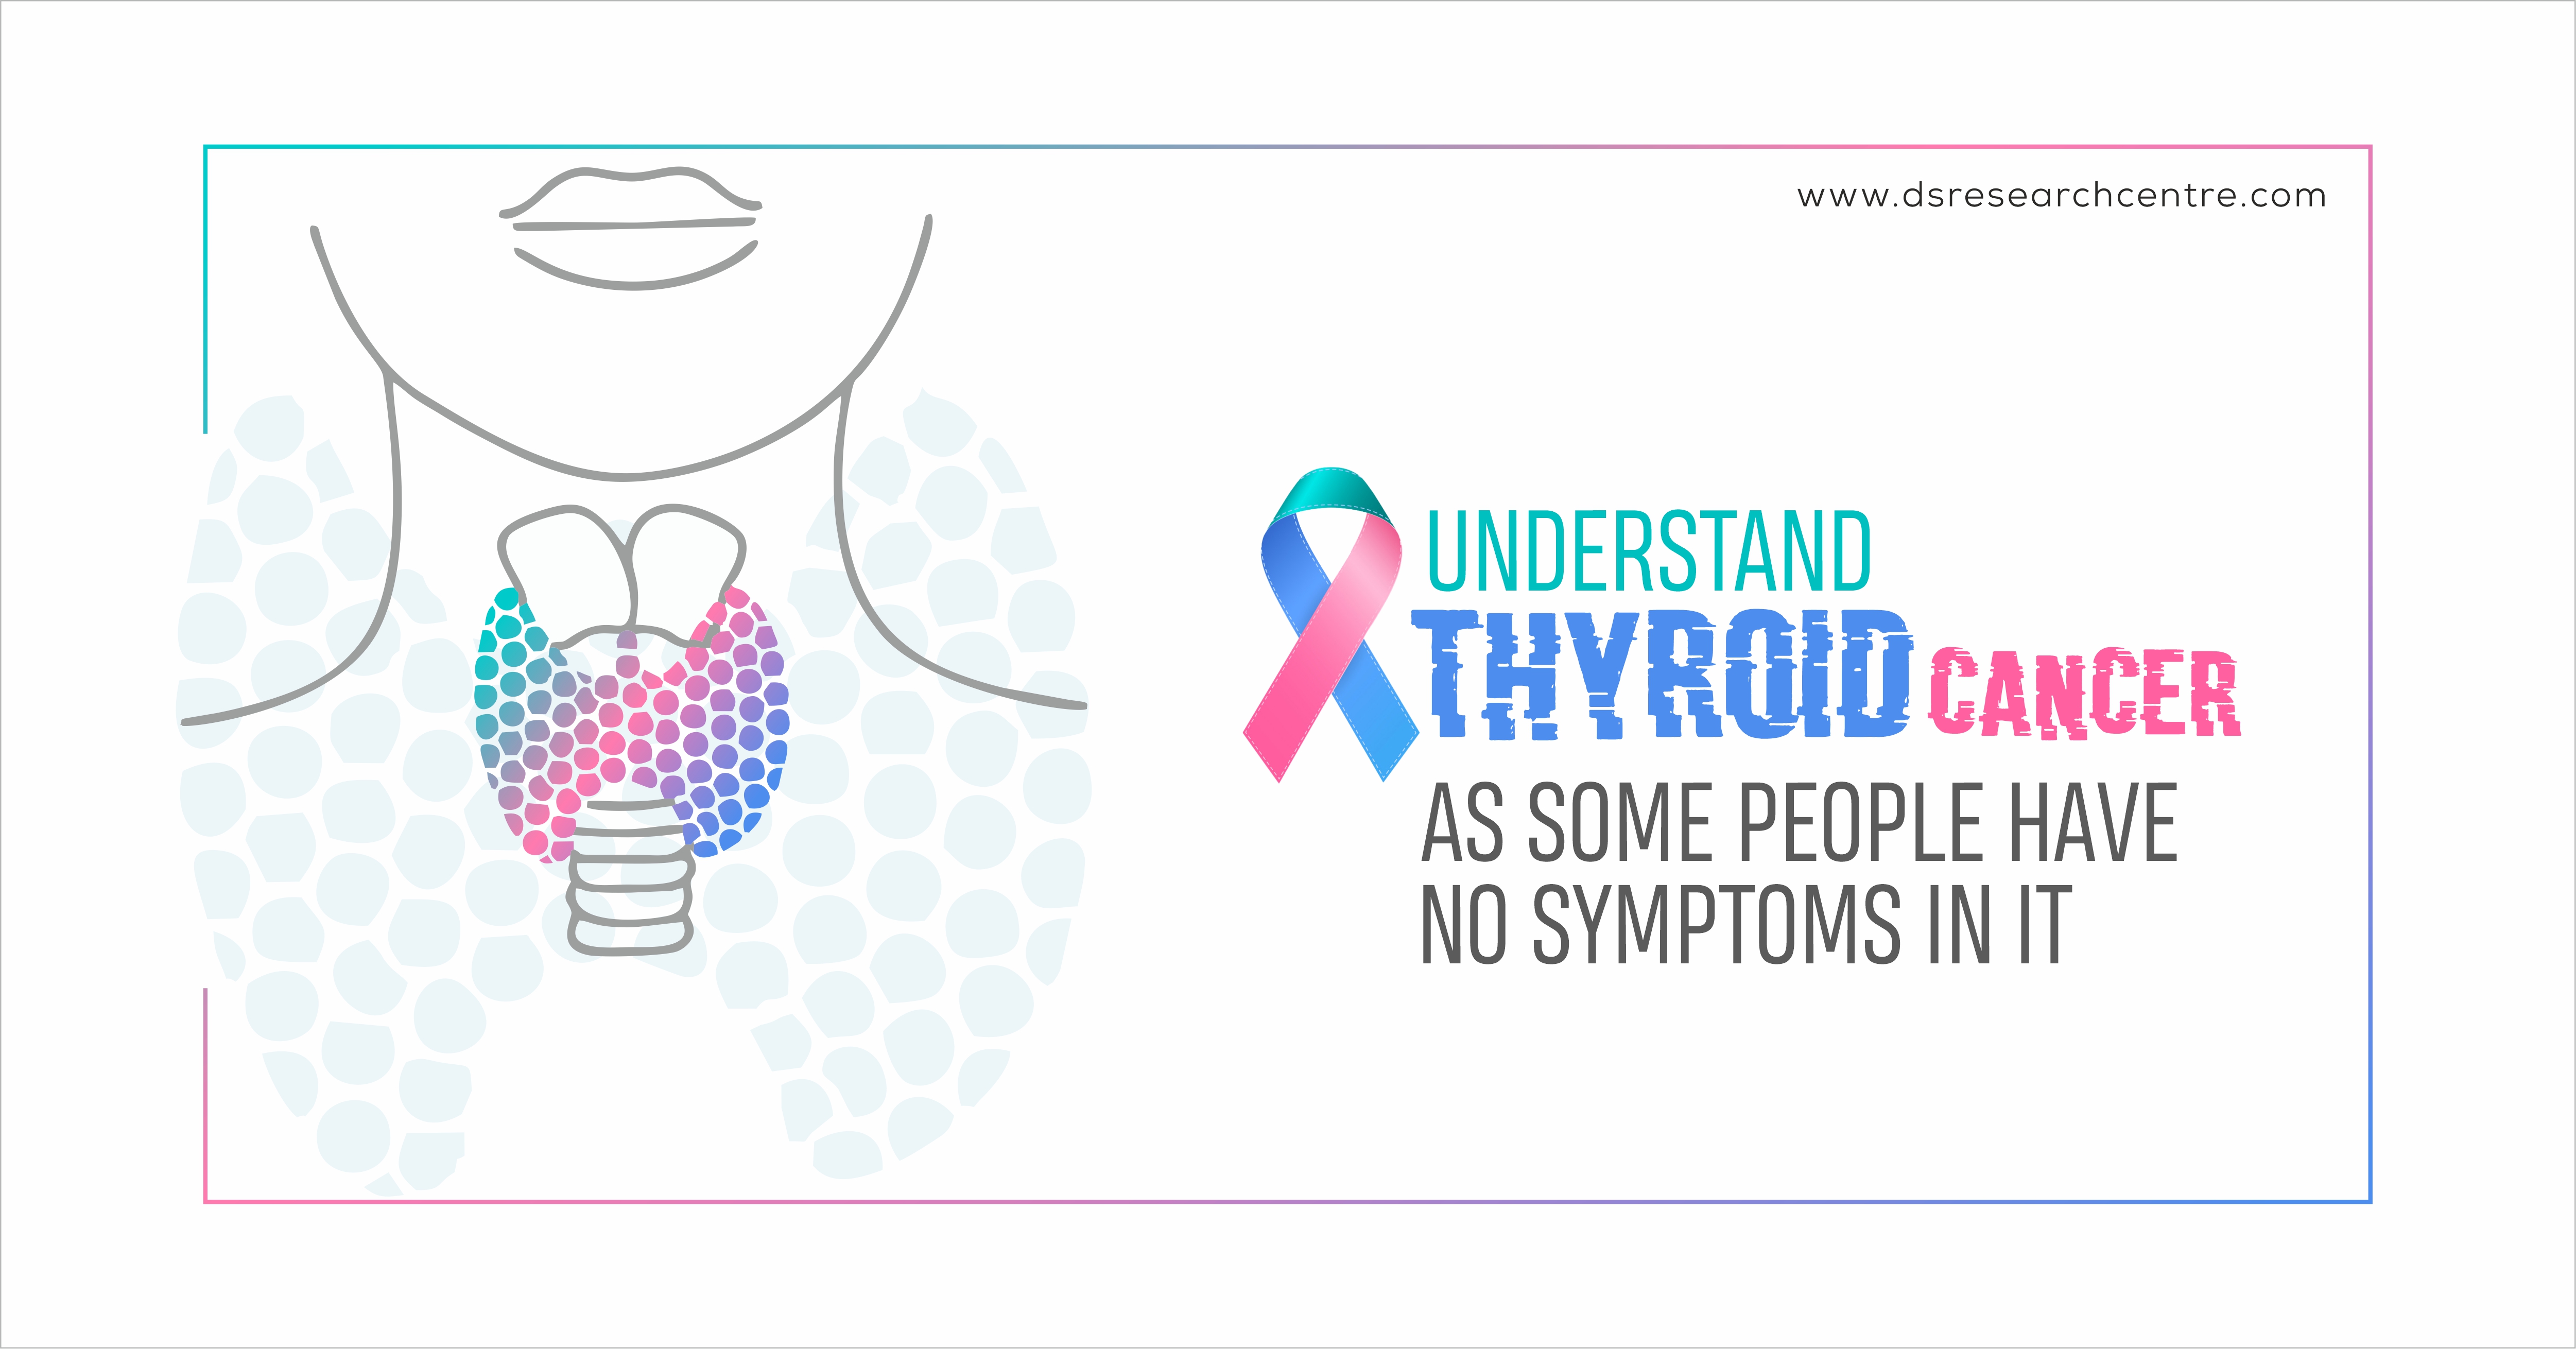 Understand Thyroid Cancer as some people have no Symptoms in it